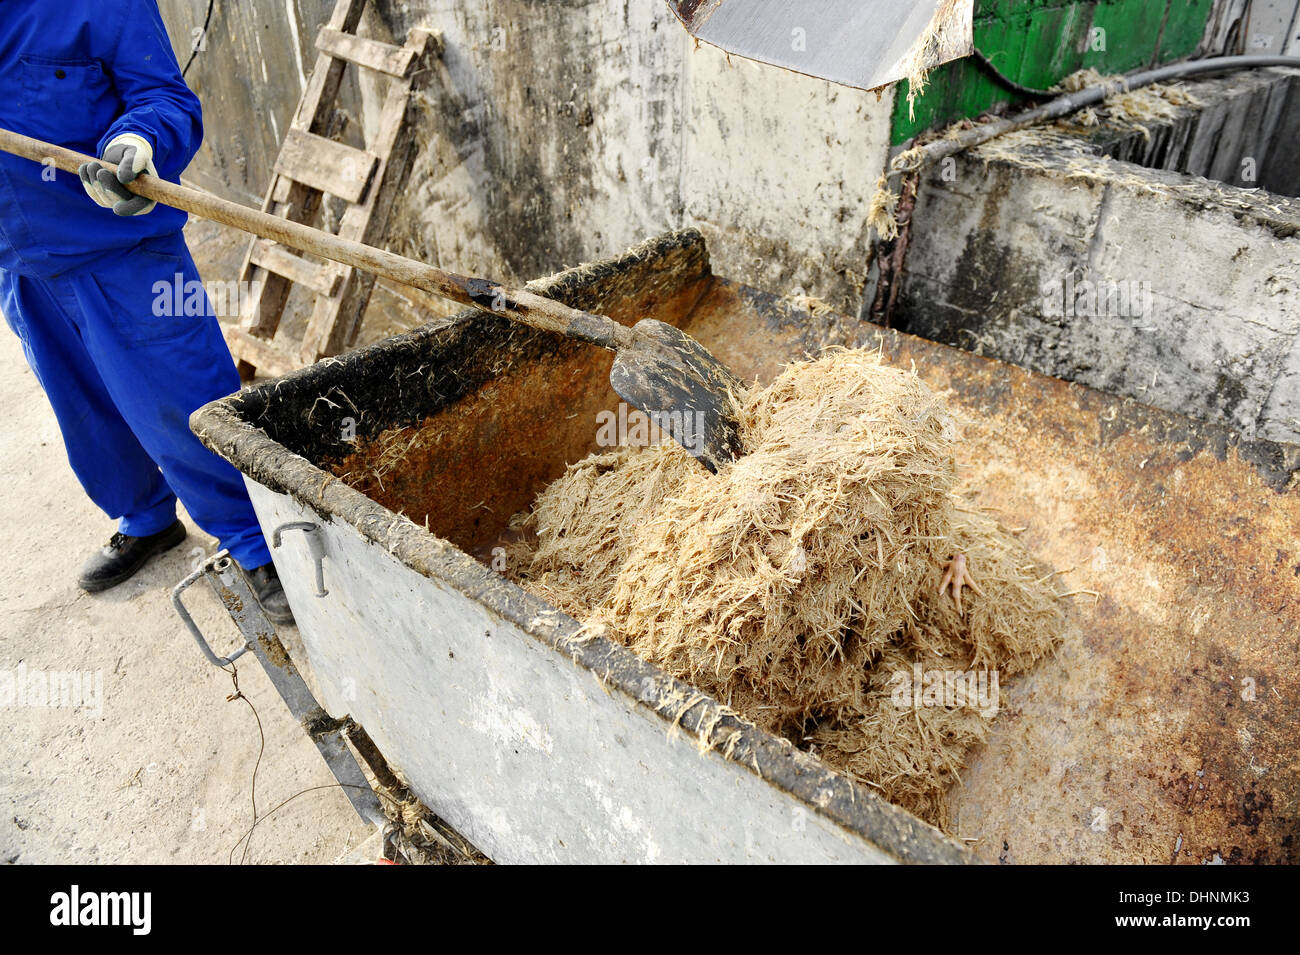 A man manages a heap of chicken feathers at a rubbish dump Stock Photo